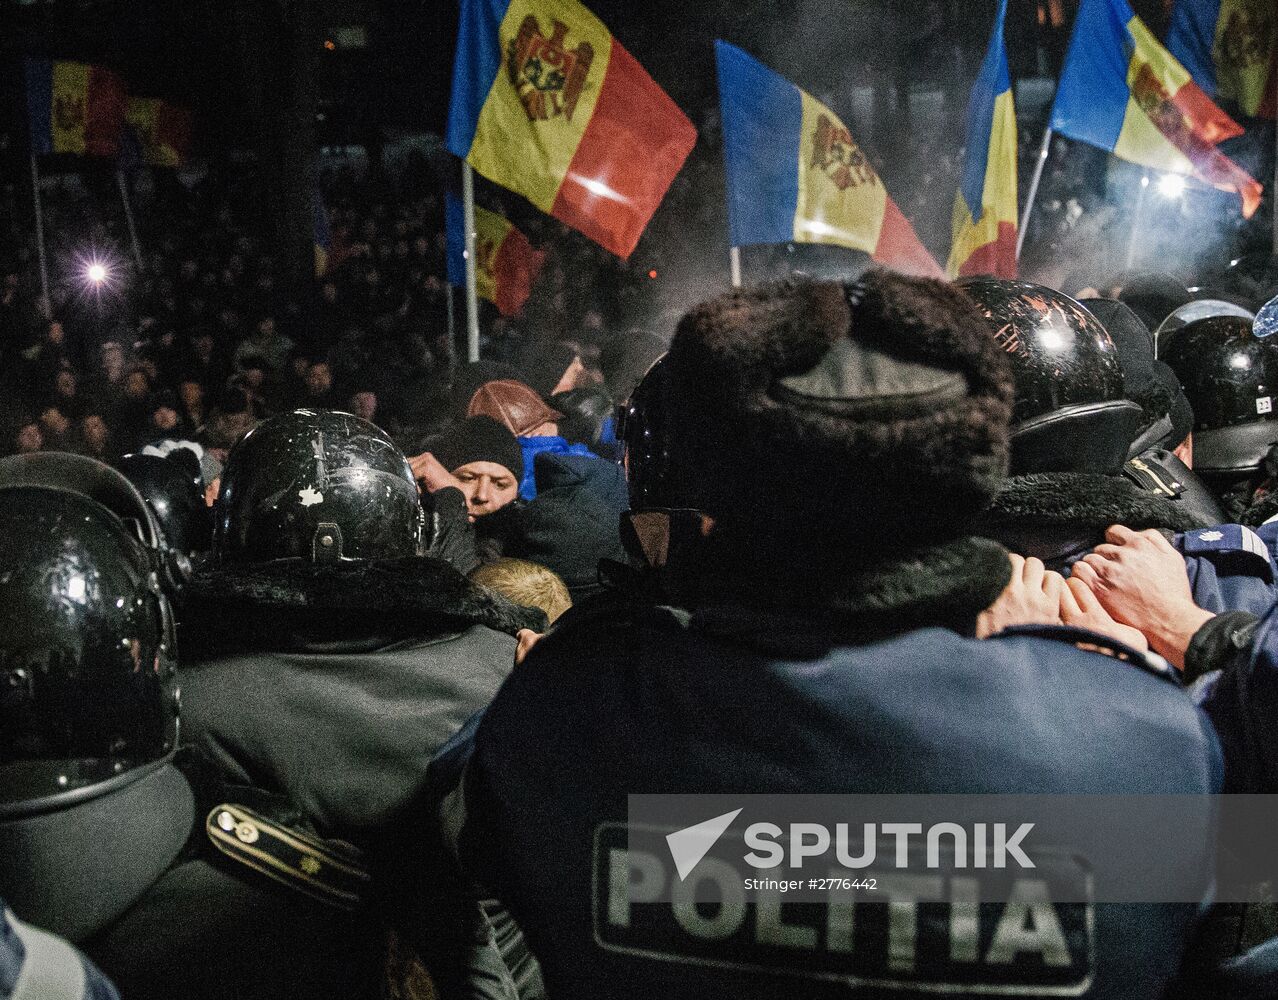 Protests outside Moldovan parliament building in Chisinau